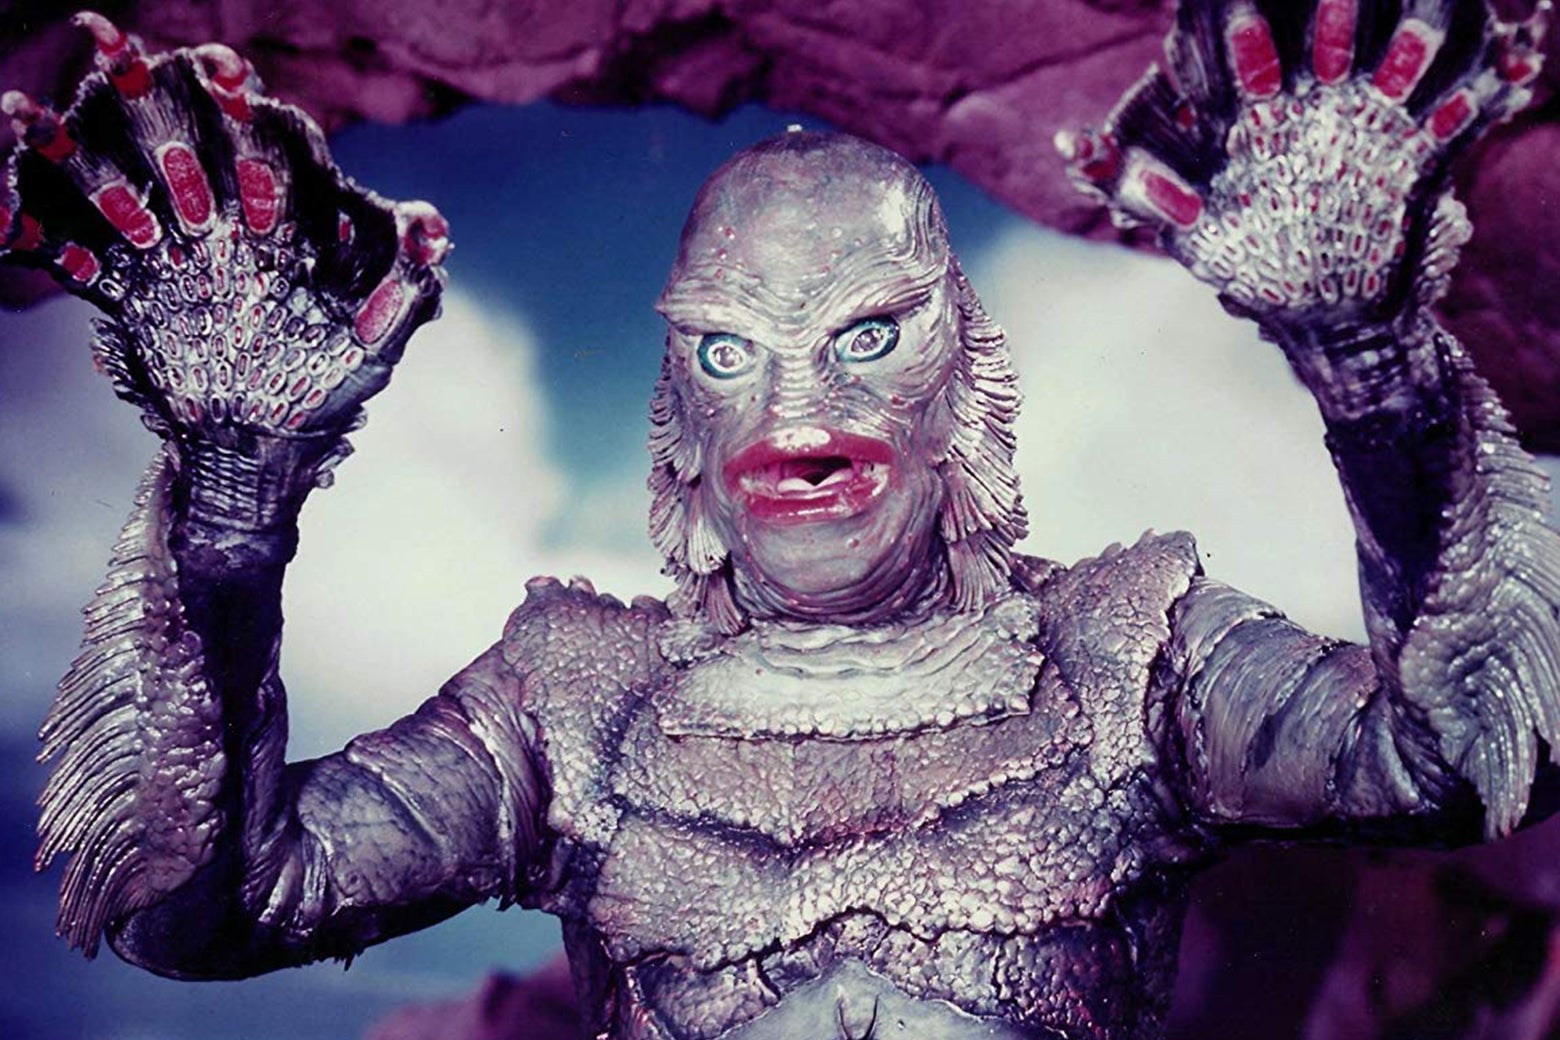 A garish, colorized promotional still of the Creature From the Black Lagoon.